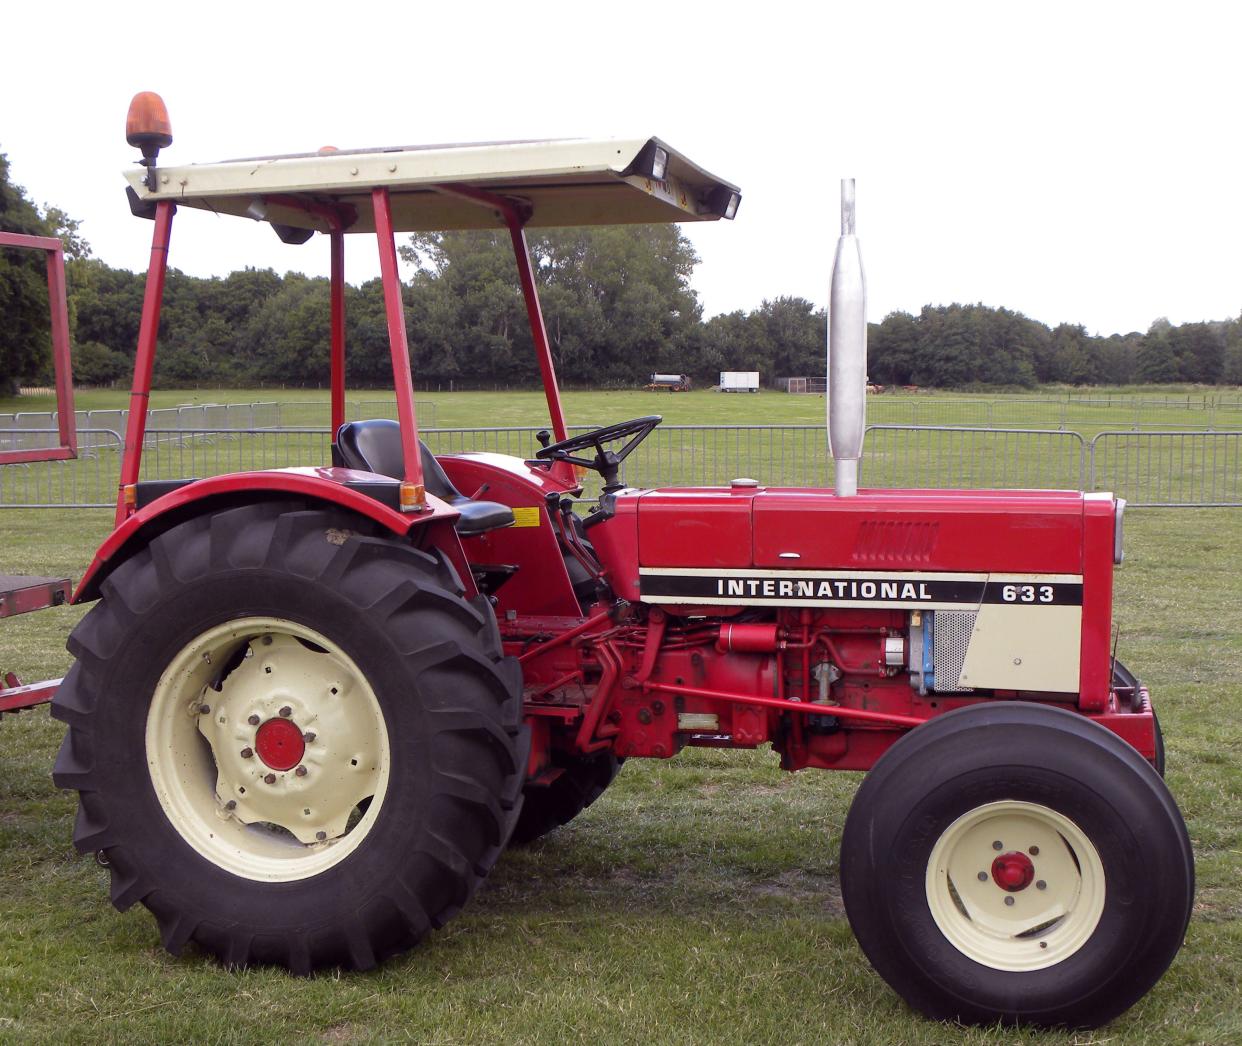 IHC International 633 tractor, produced from 1975 to 1978